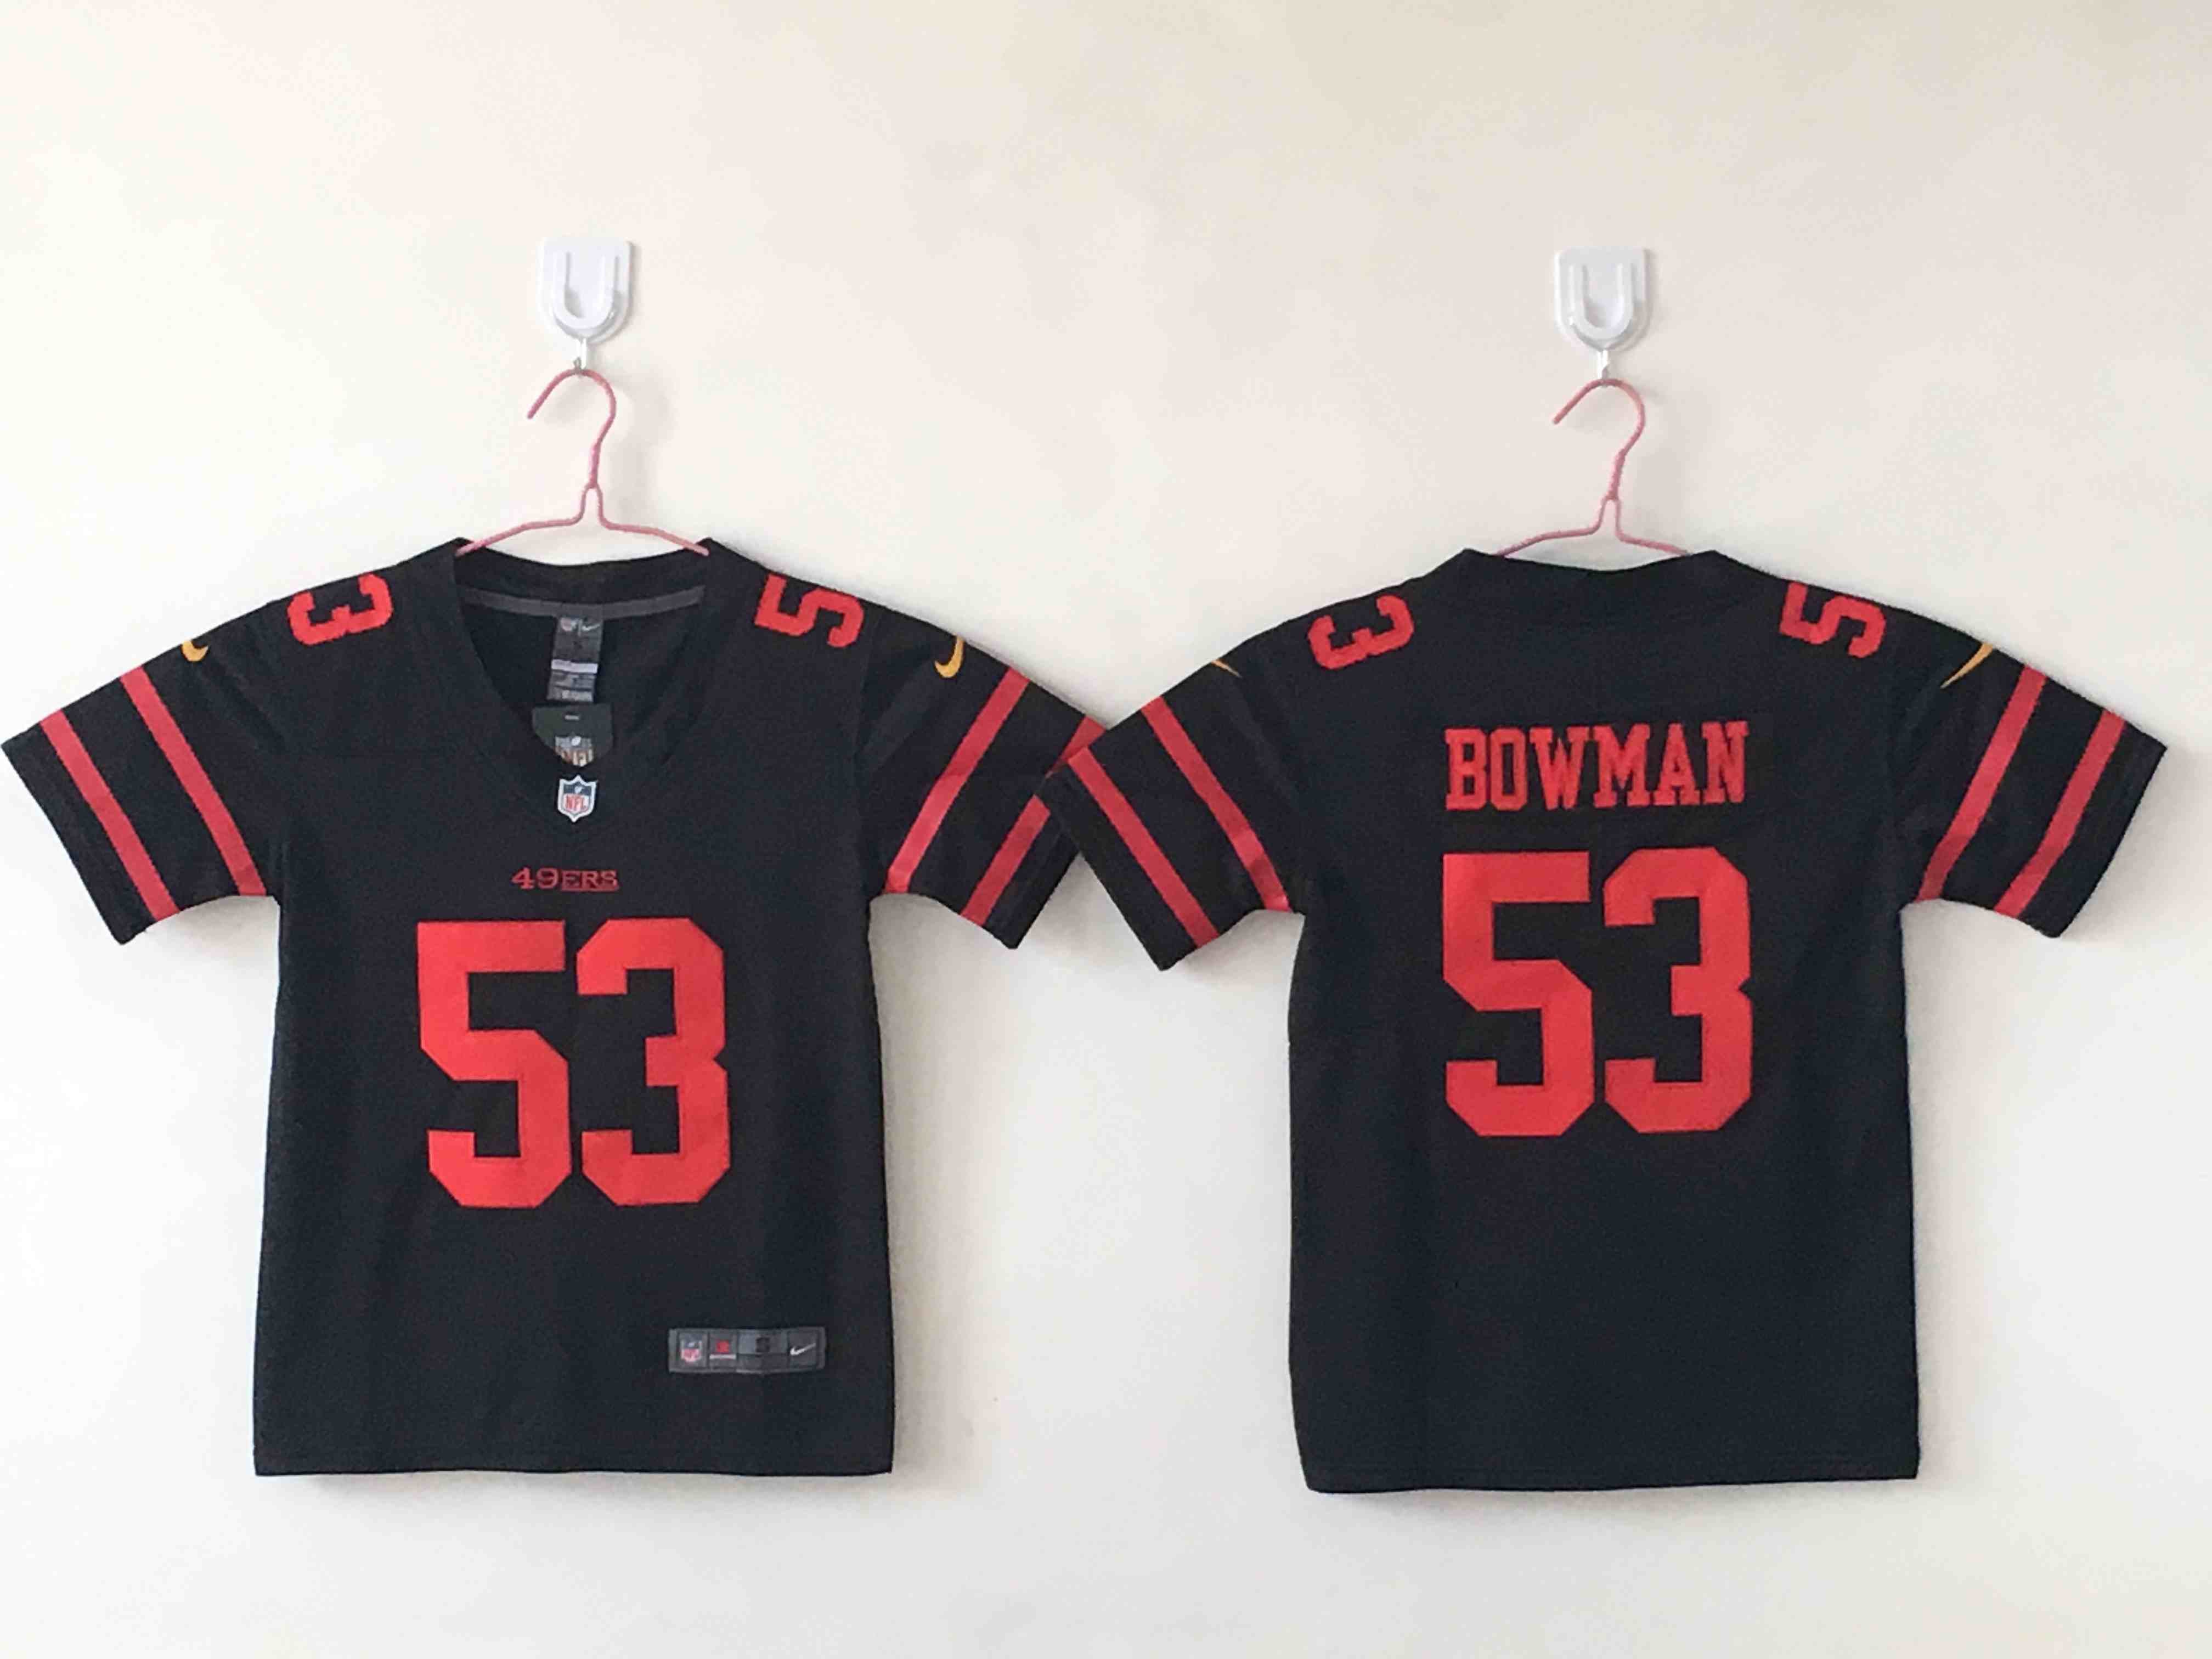 Youth San Francisco 49ers #53 NaVorro Bowman Nike Black Vapor Untouchable Limited Stitched NFL Jersey